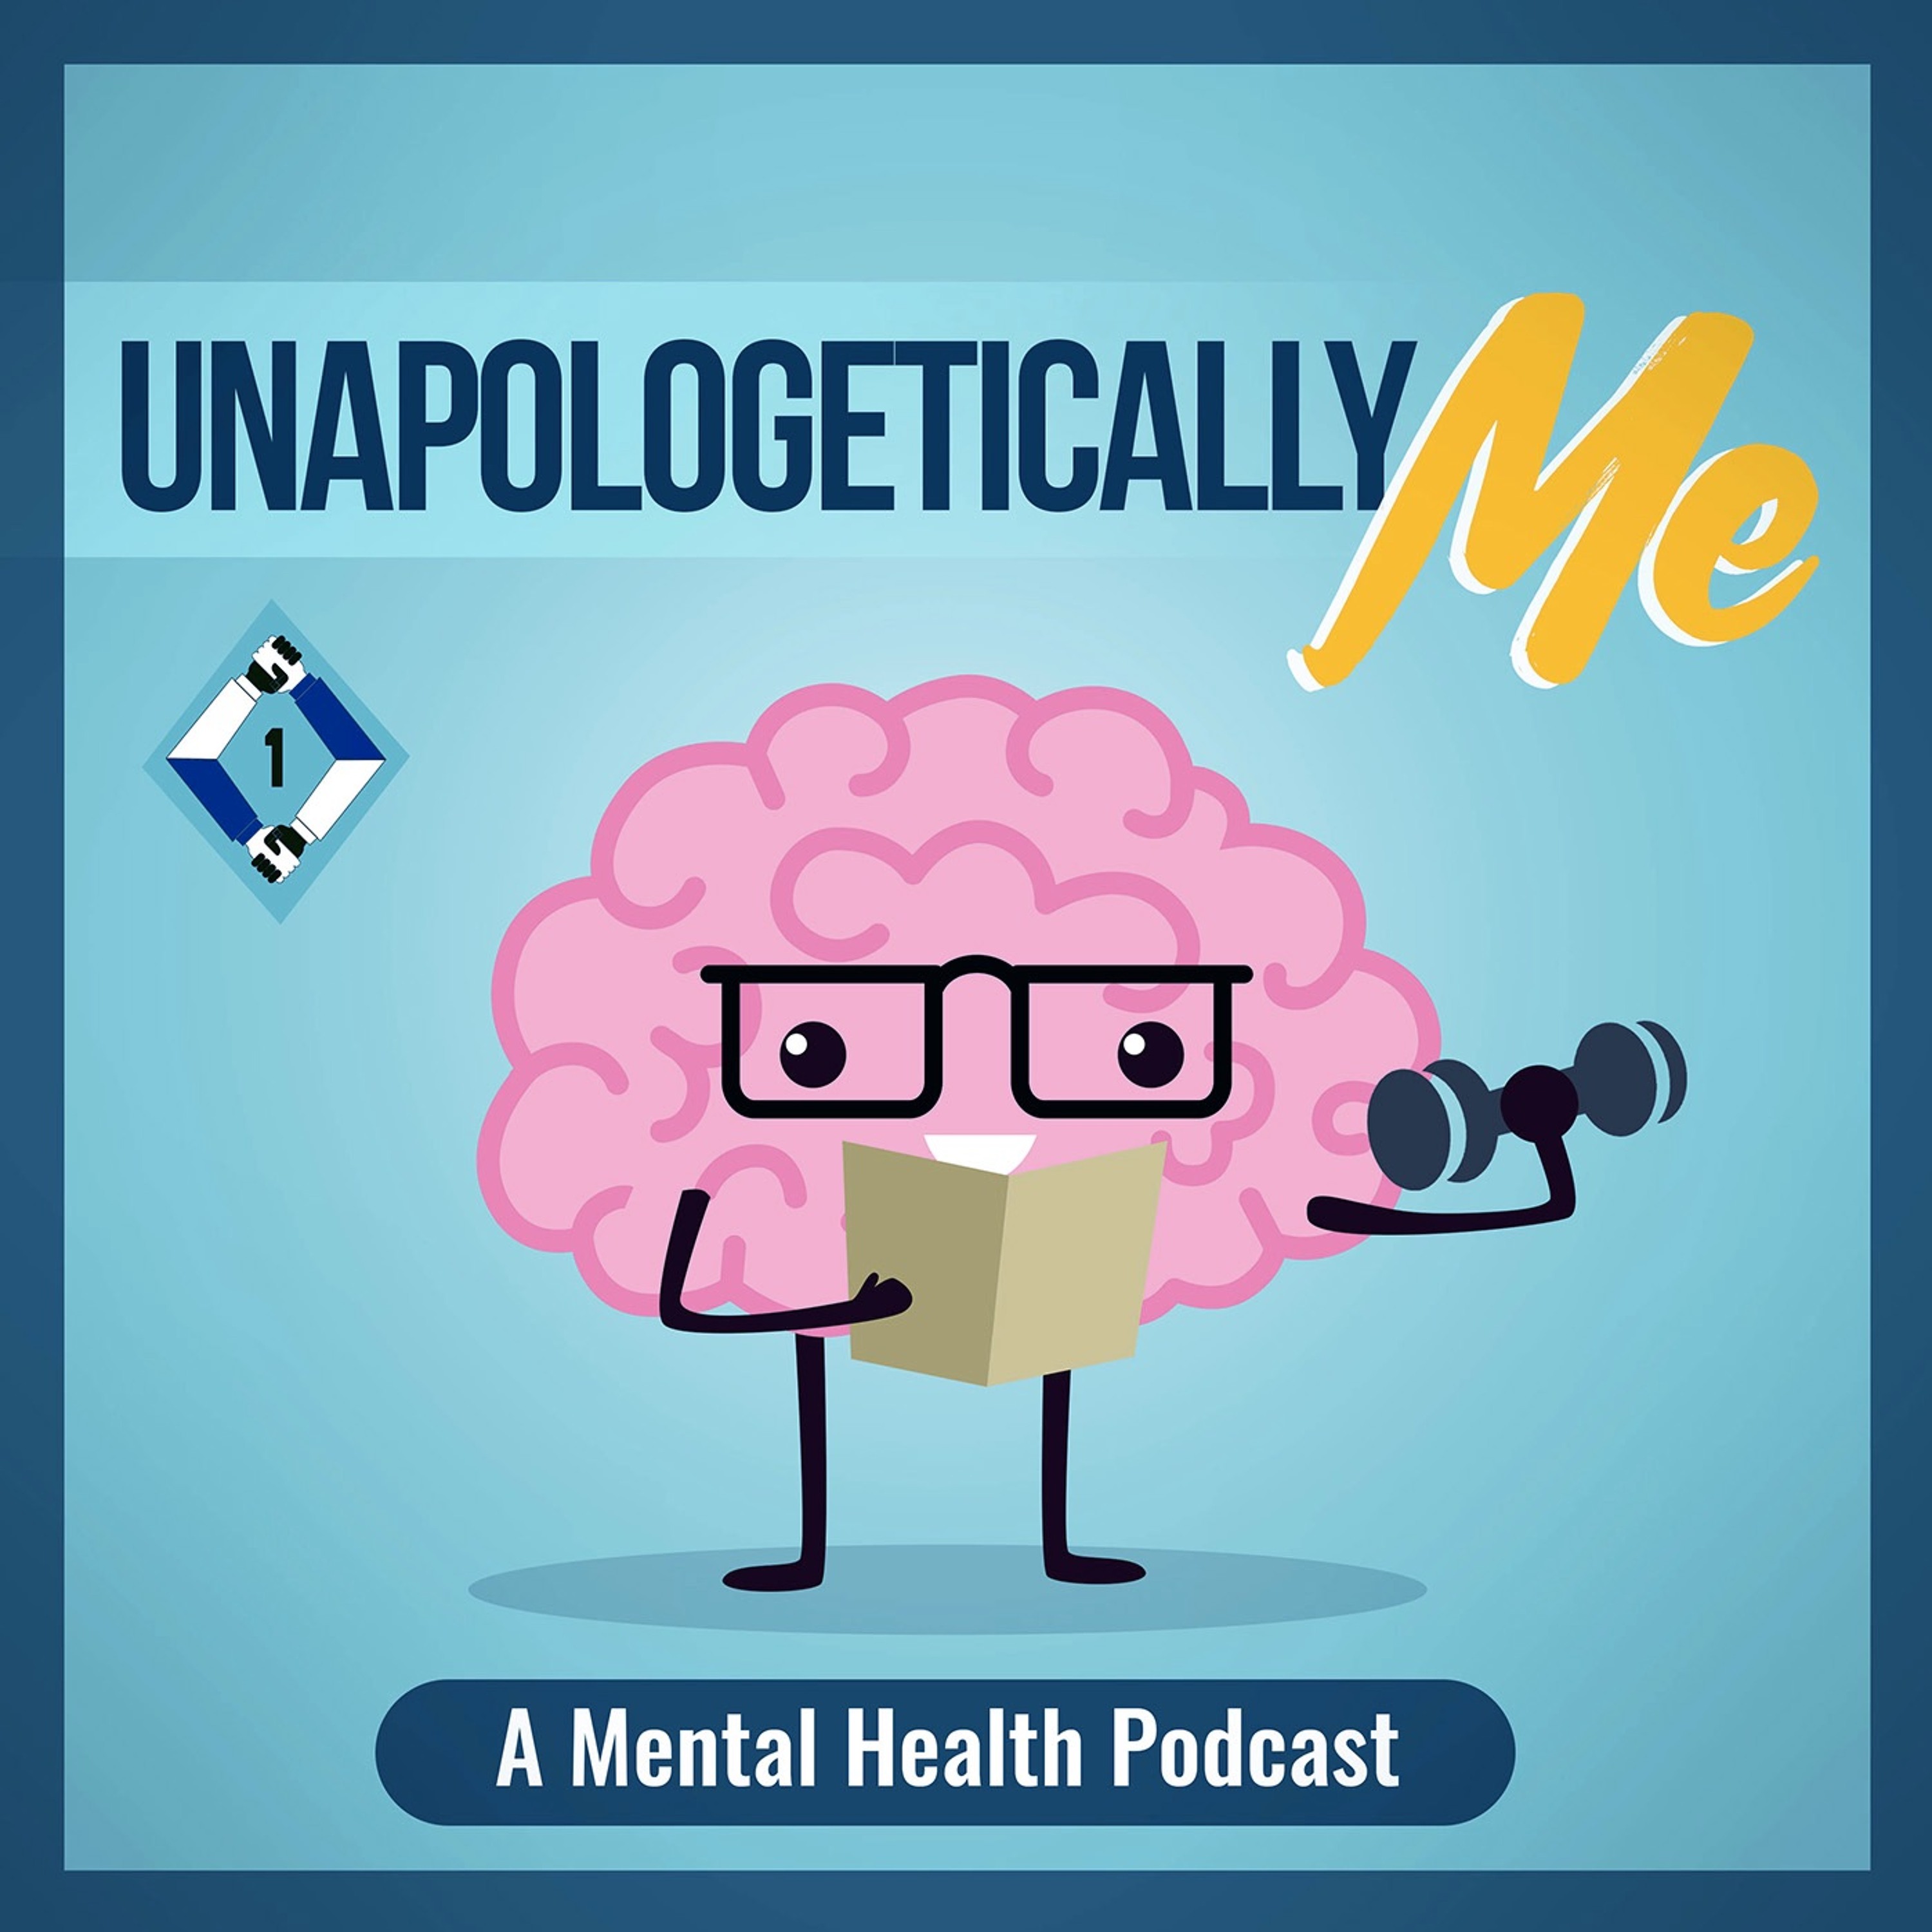 Unapologetically Me: A Mental Health Podcast - United States Coast Guard